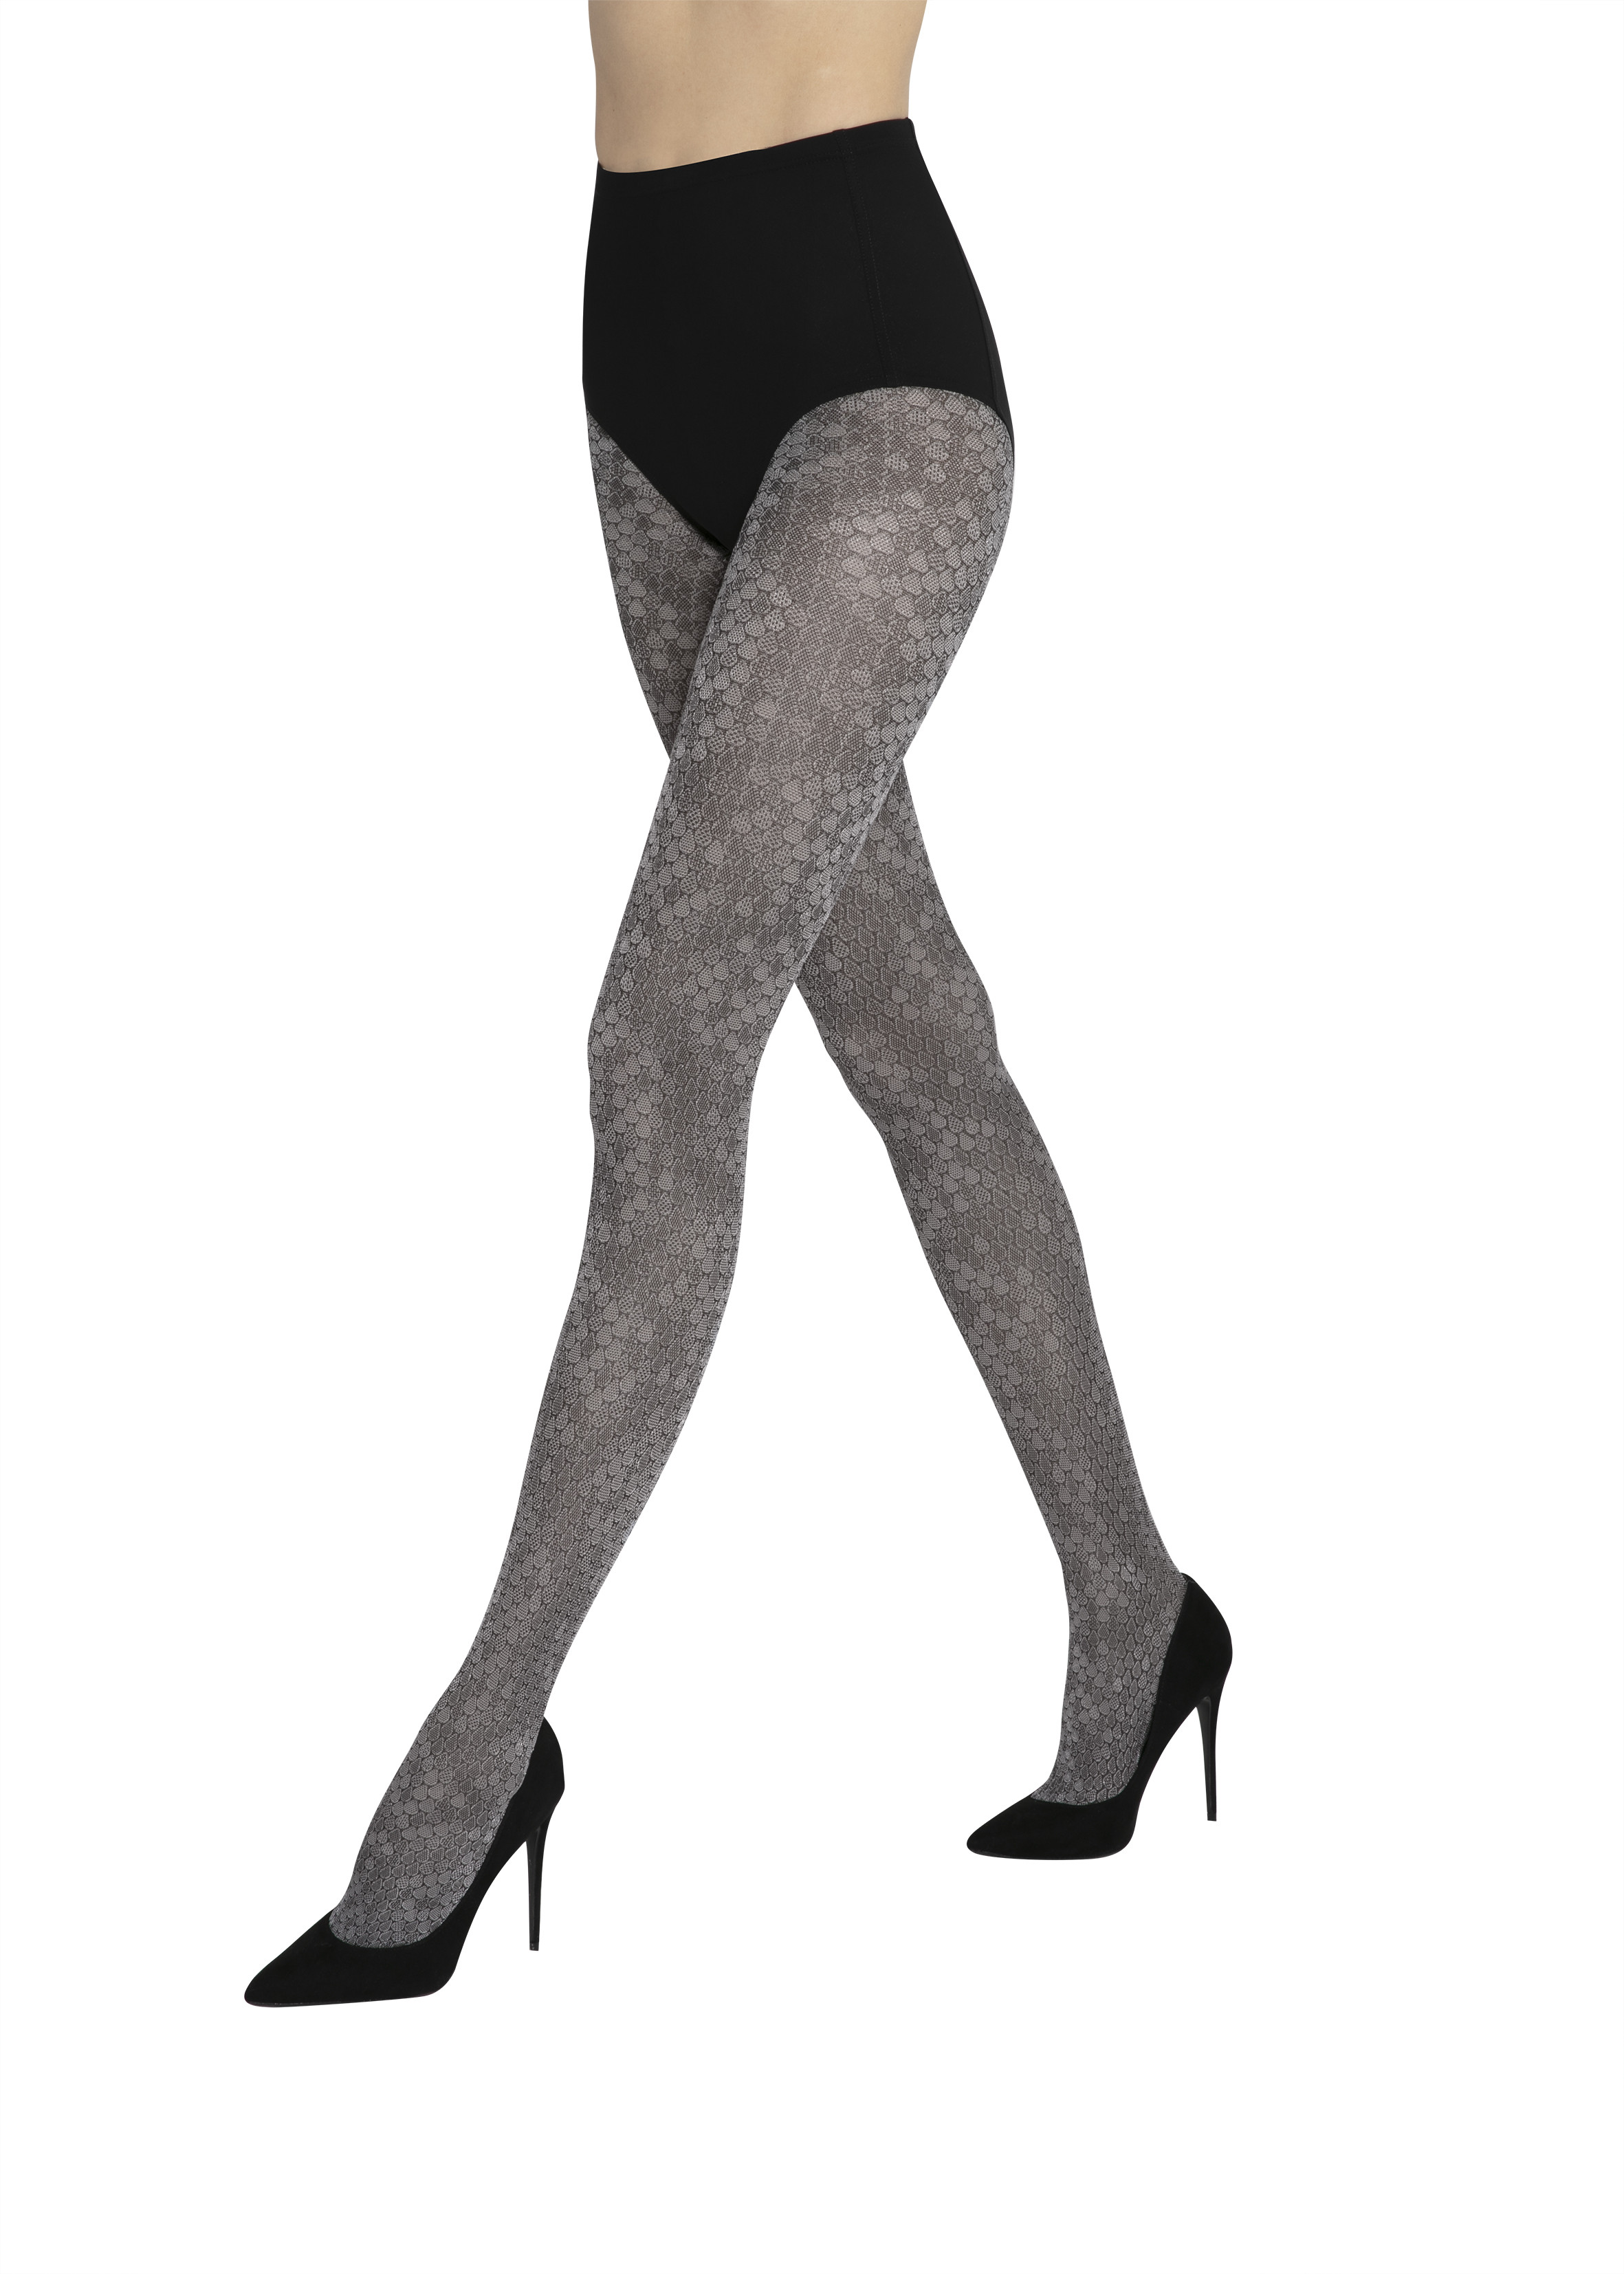 Sheer 20 Denier Tights with Glitter - Patterned tights - Calzedonia